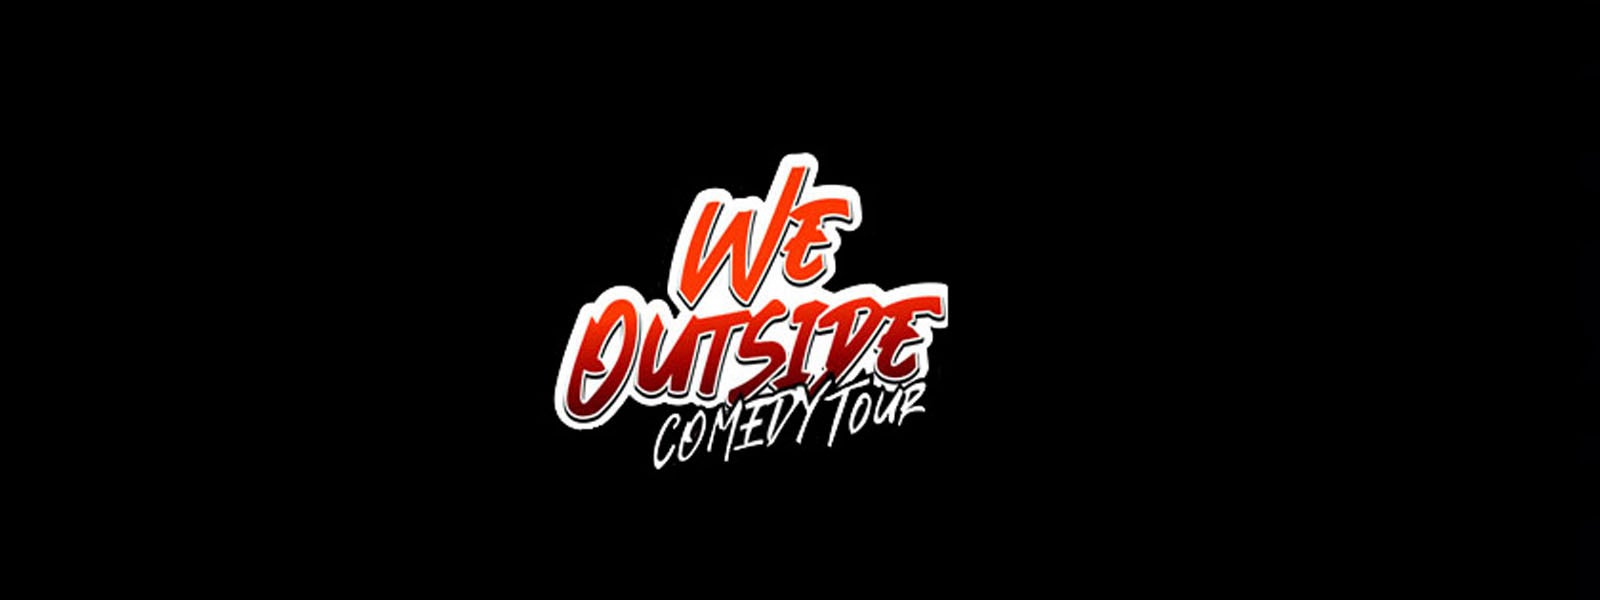 POSTPONED - "We Outside" Comedy Tour